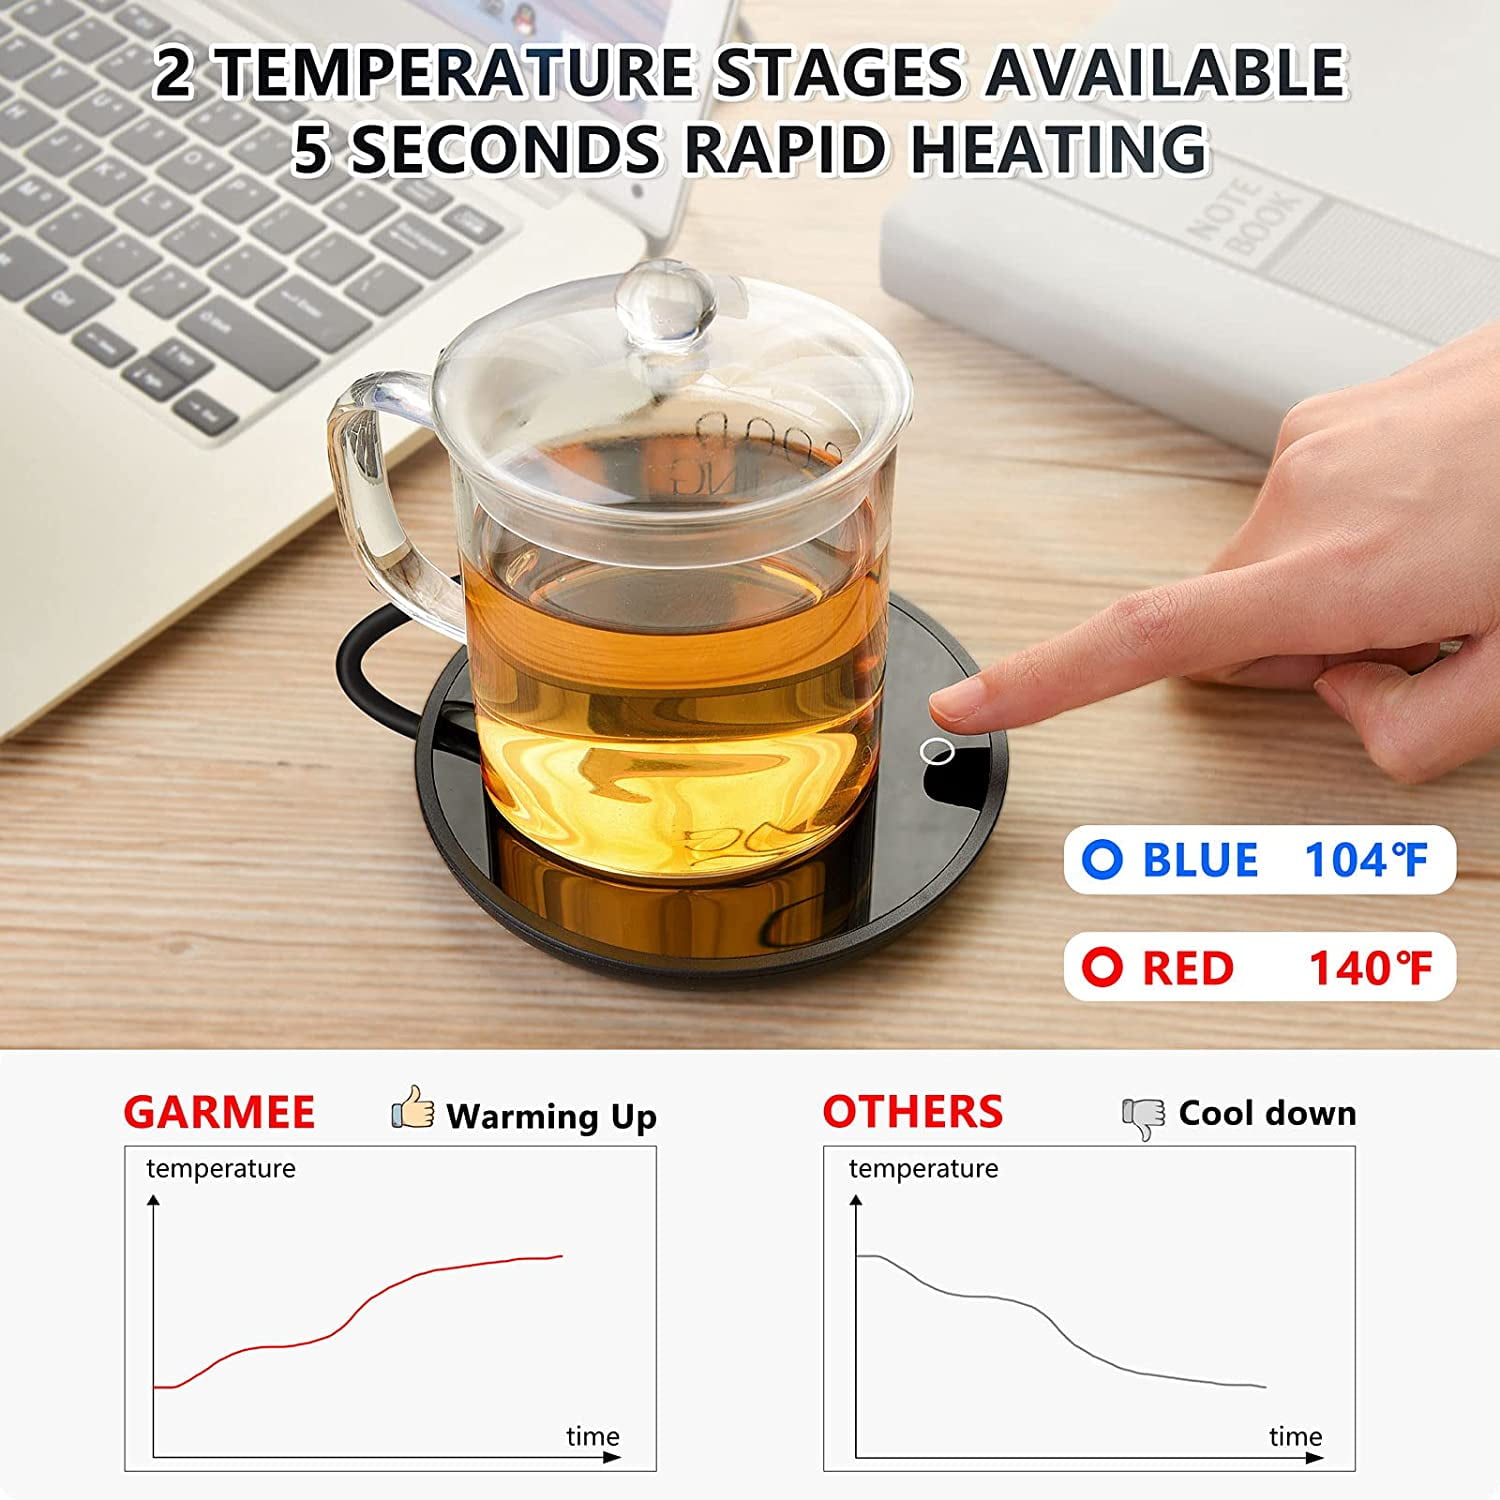 XMMSWDLA Coffee Mug Warmer, Electric Beverage Warmers for Office Home Desk  Use, Smart Cup Warmer Thermostat for Hot Coffee Tea Milk Candle Wax with  Gravity Switch Auto On/Off 